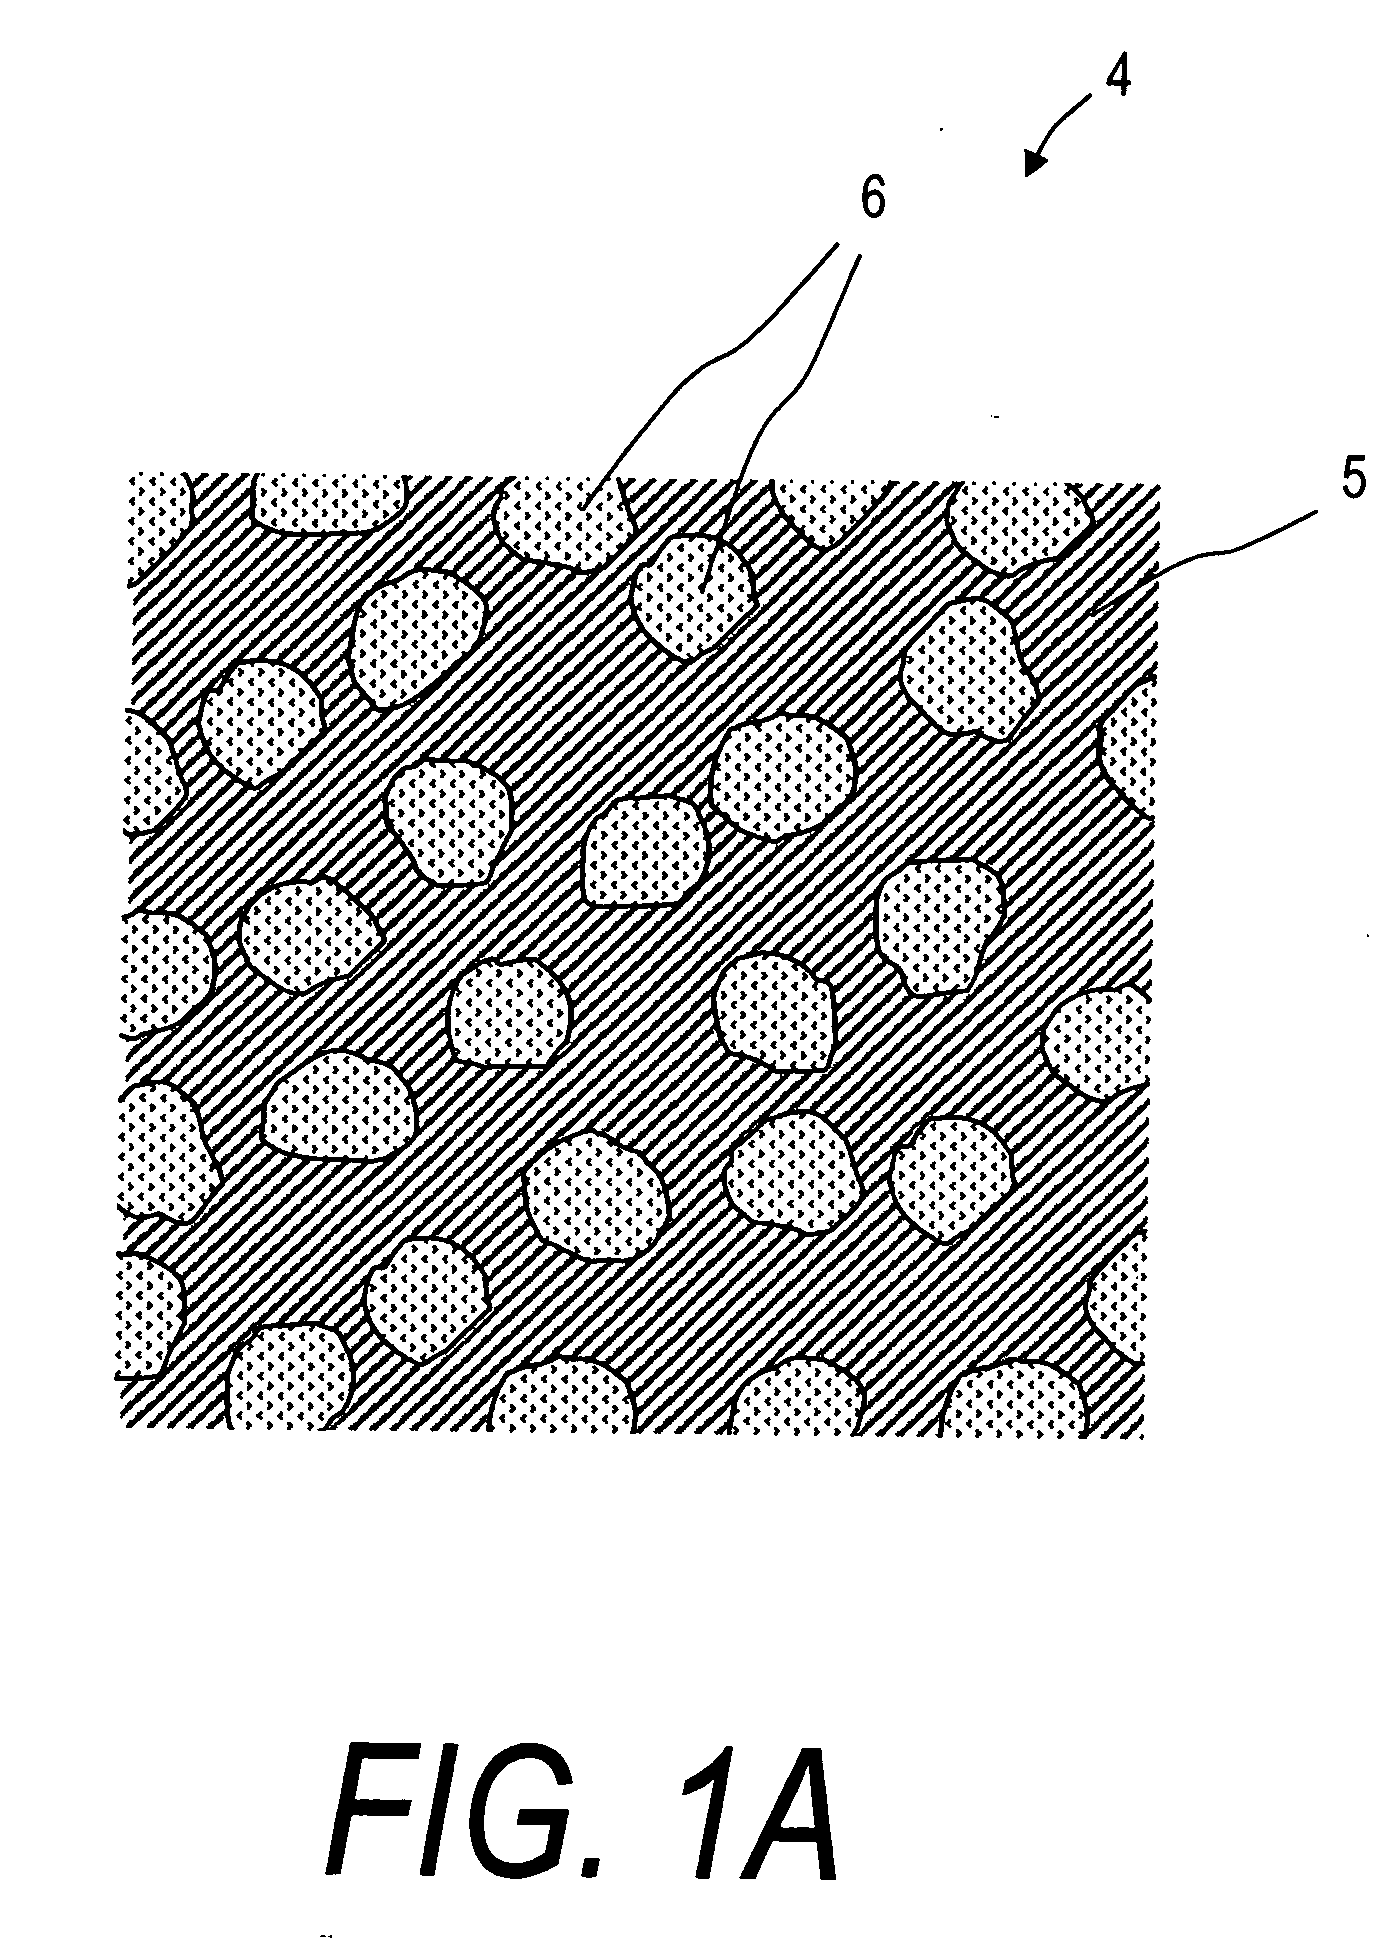 Composites and methods for treating bone